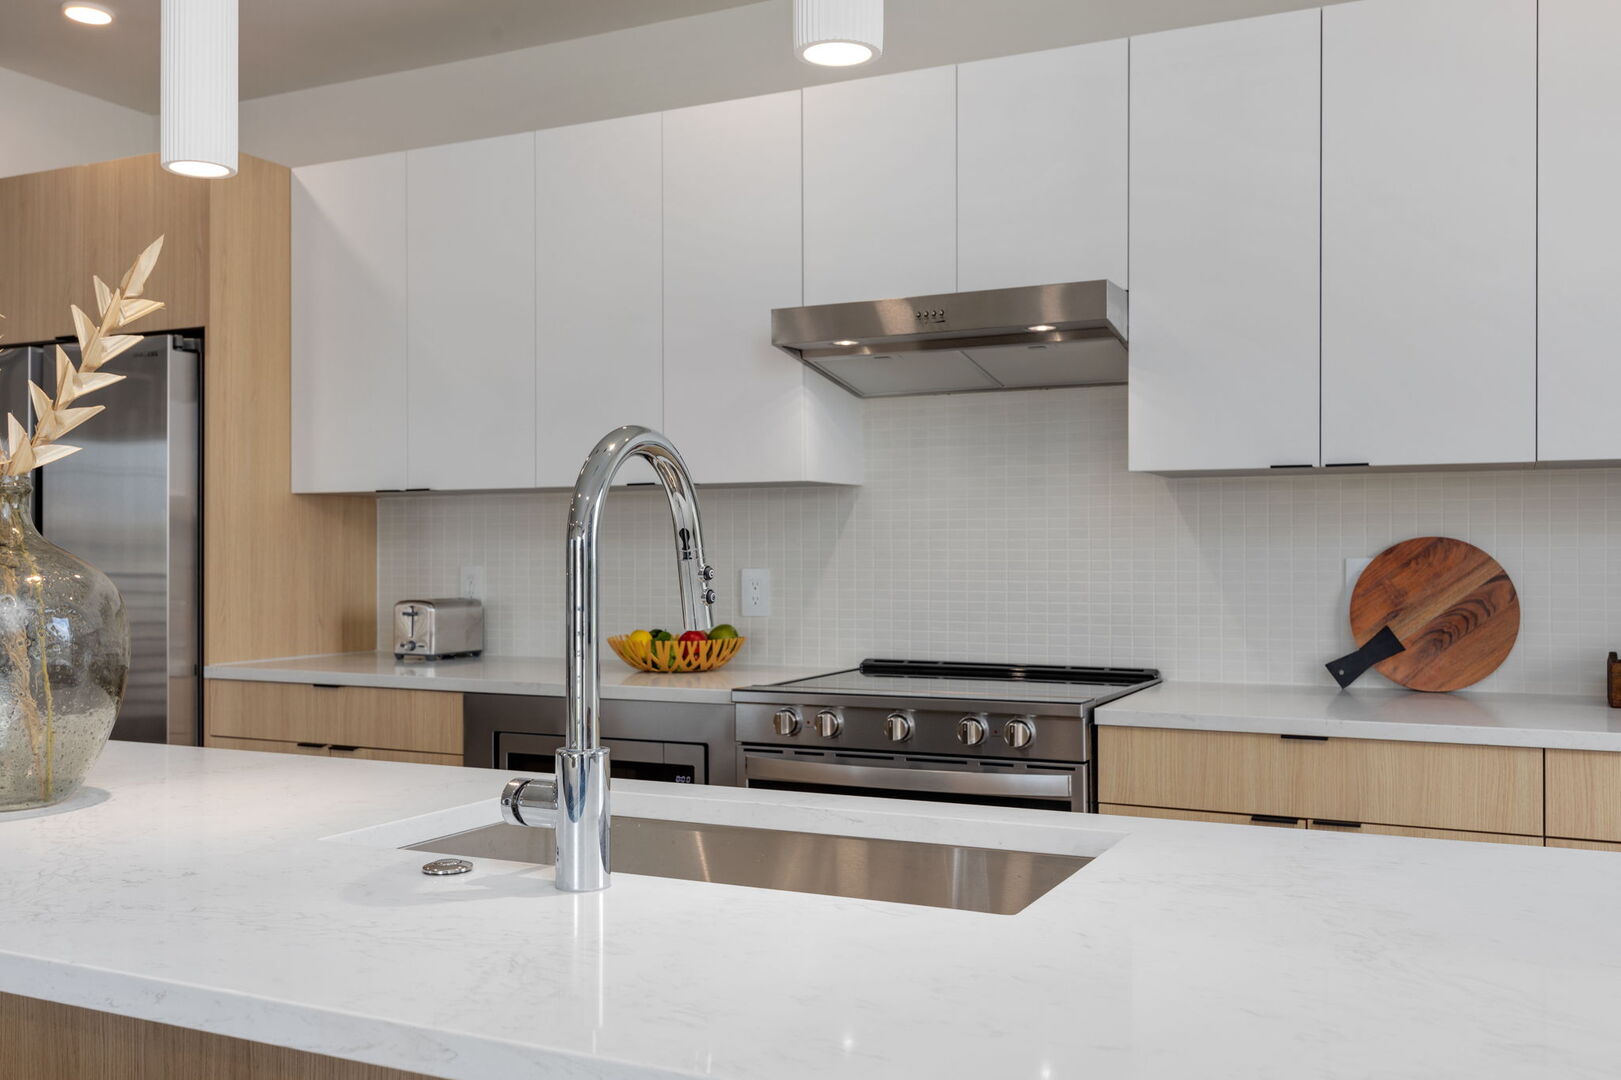 Fully equipped modern kitchen stocked with all culinary essentials and featuring stainless steel appliances with island bar seating.